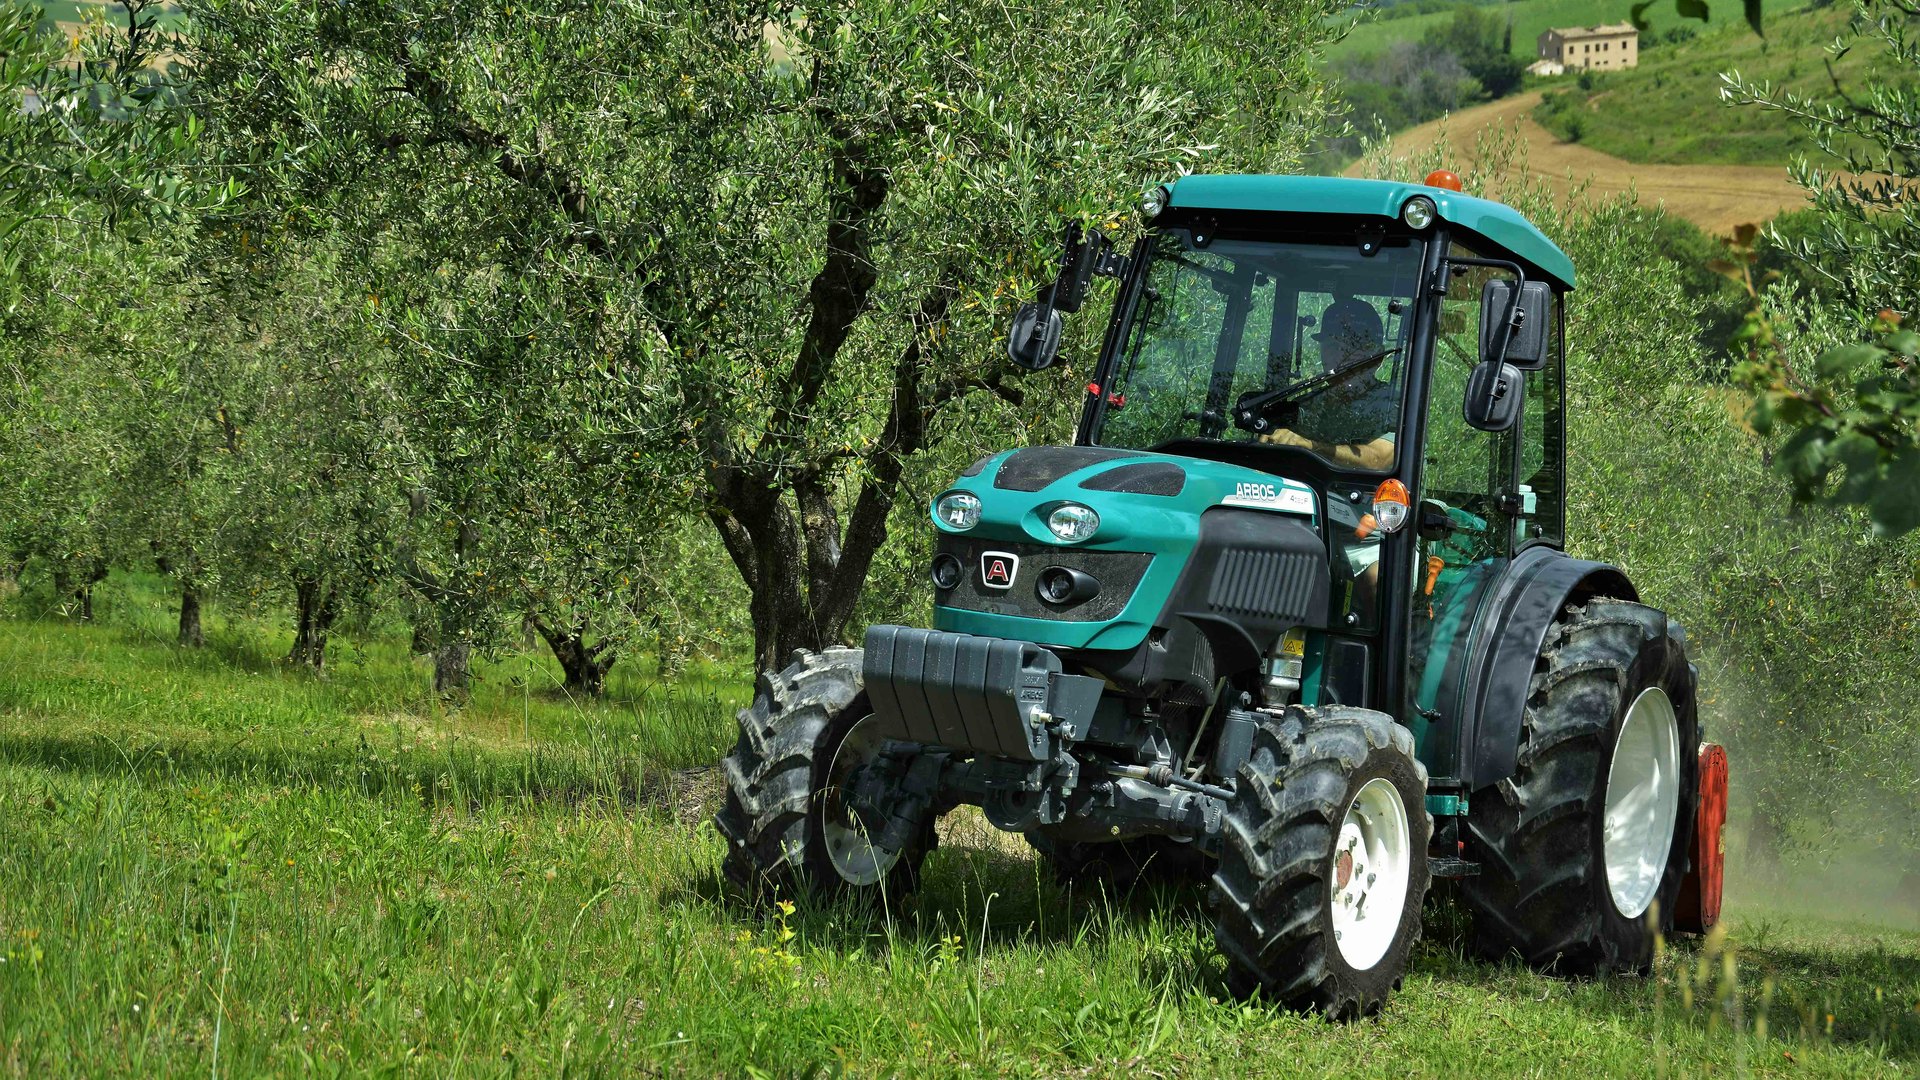 Agricultural technology and farming machinery